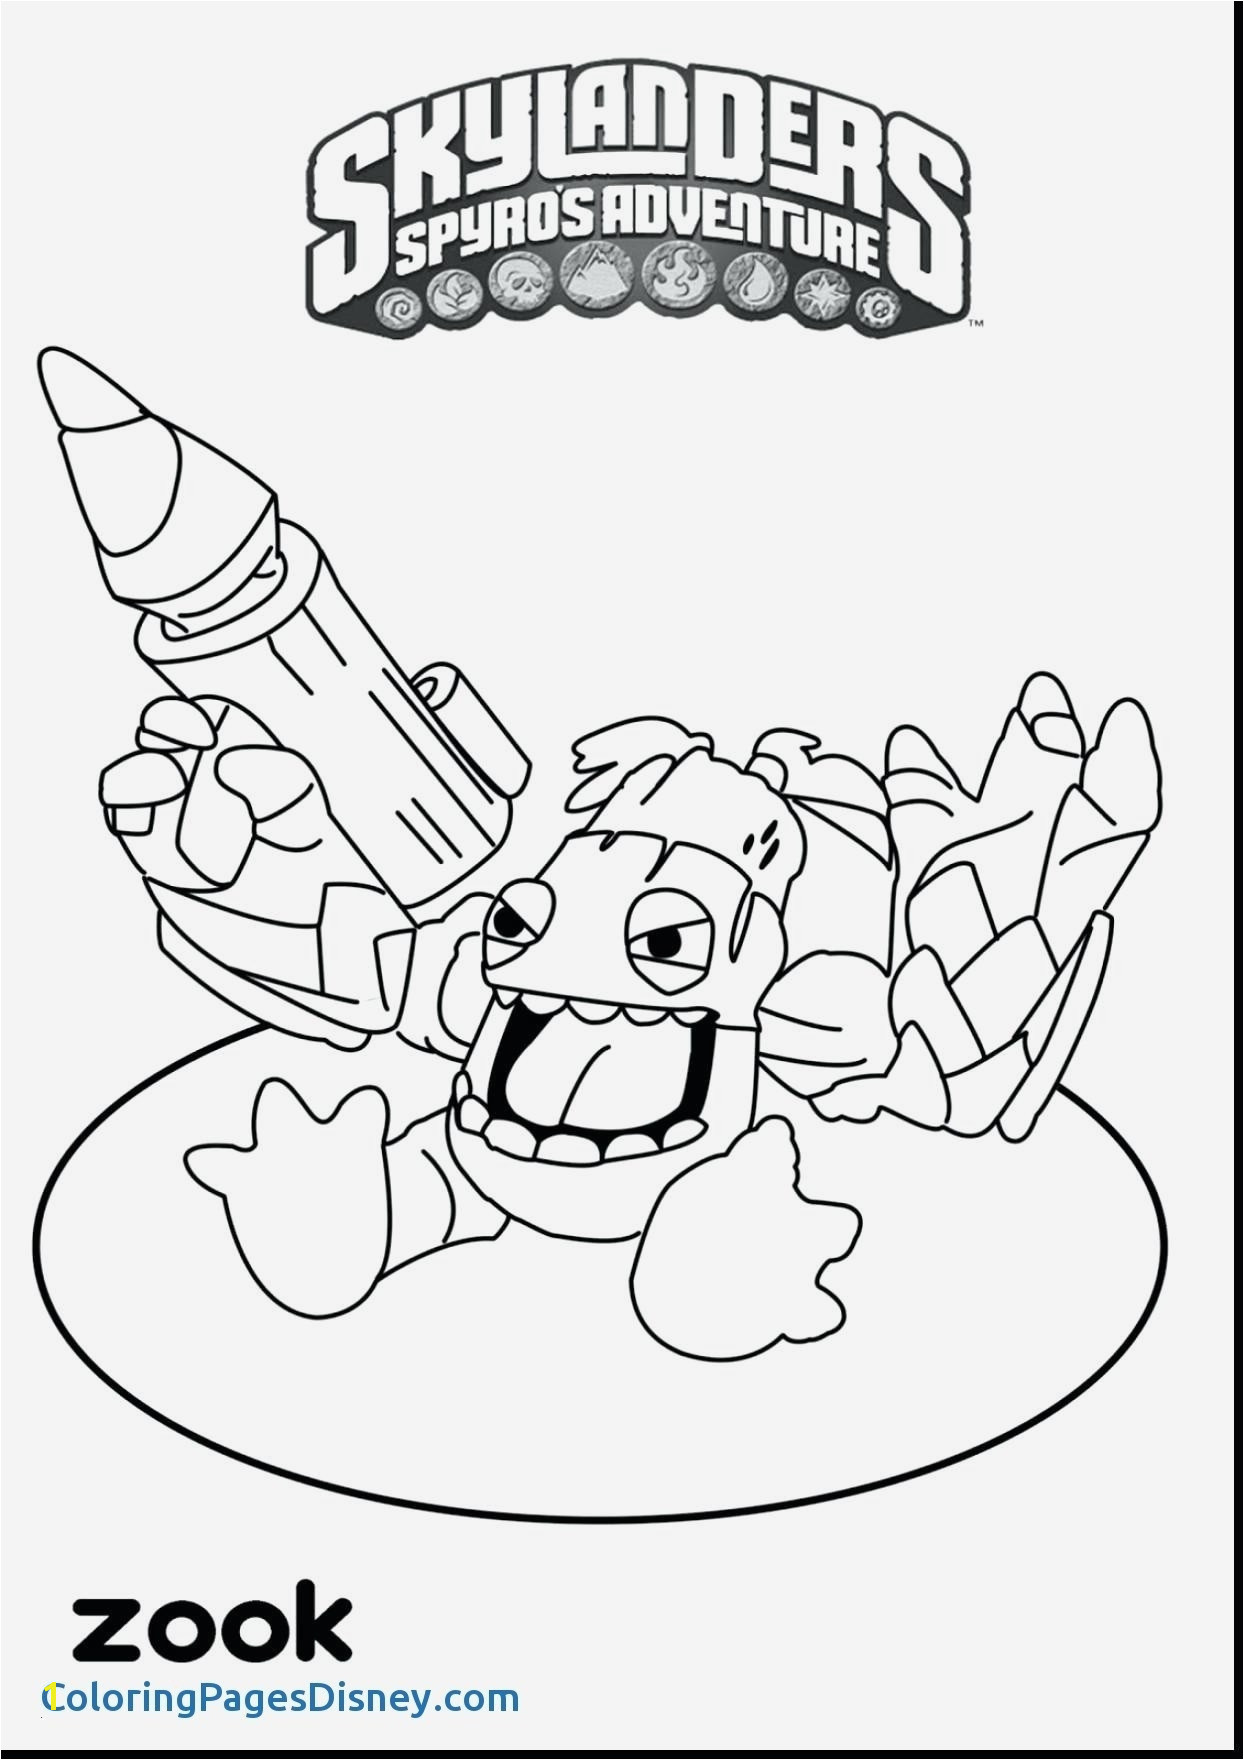 Awesome gingerbread man coloring pages Free 2 t Gingerbread man coloring pages christmas ·